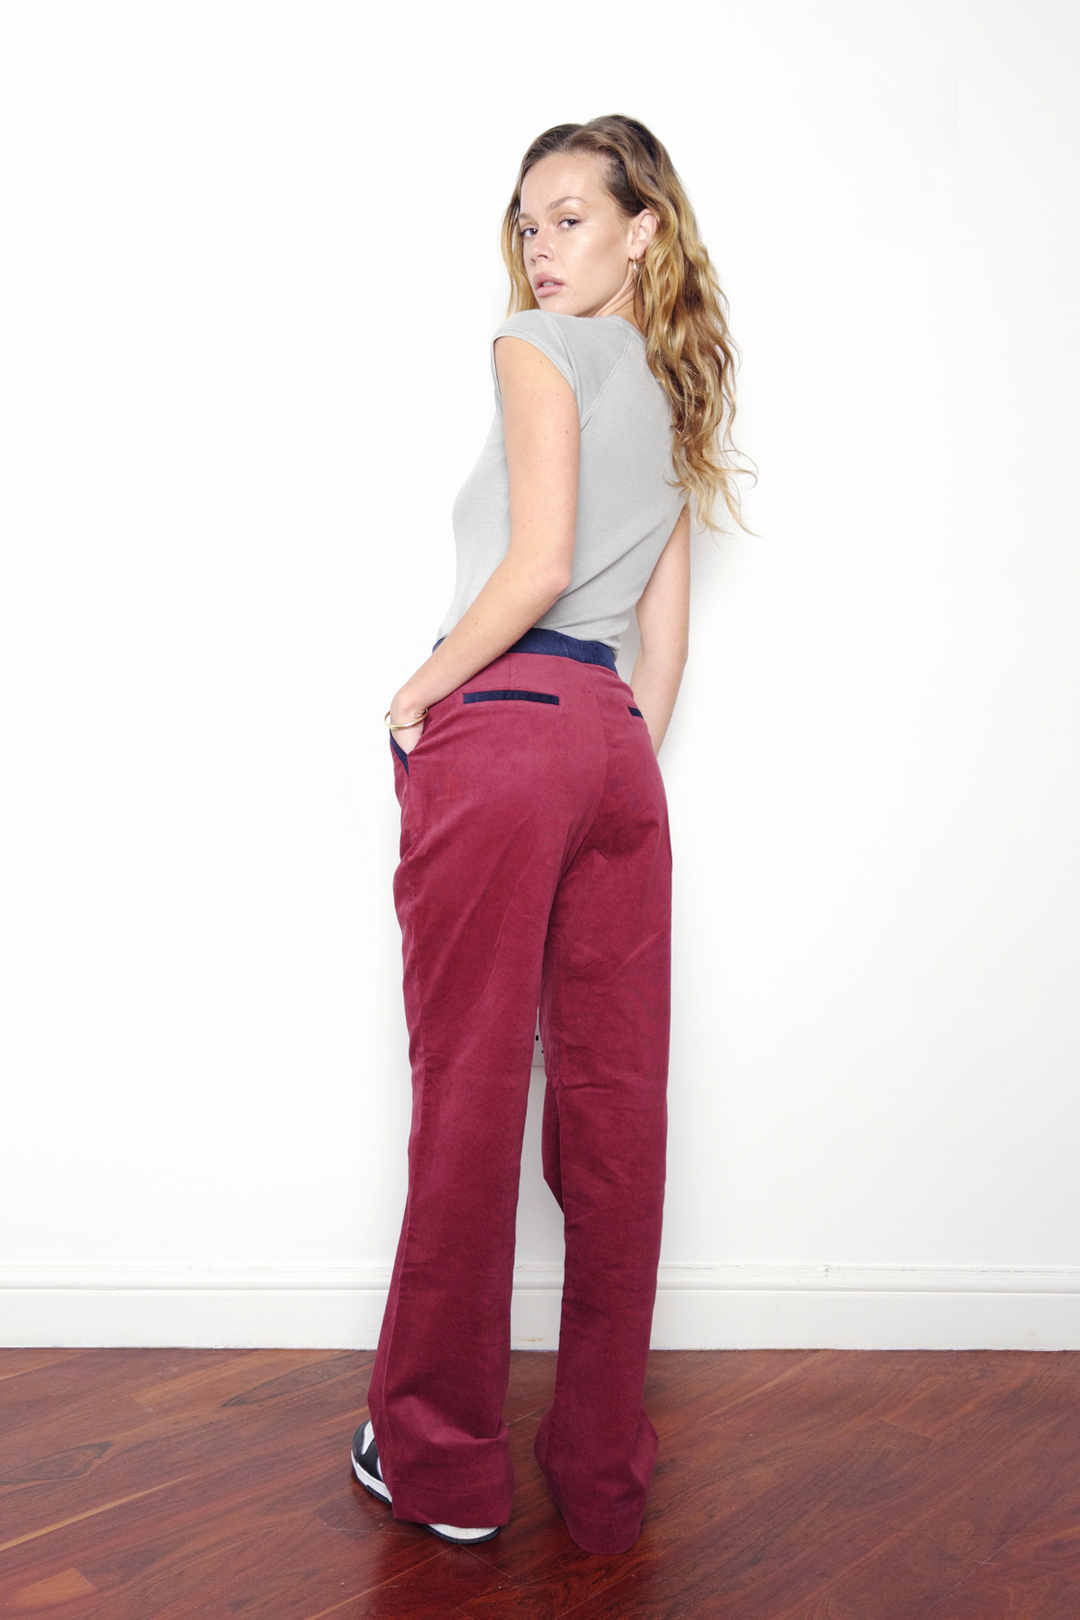 Grape Cord Trousers - noemotions-store